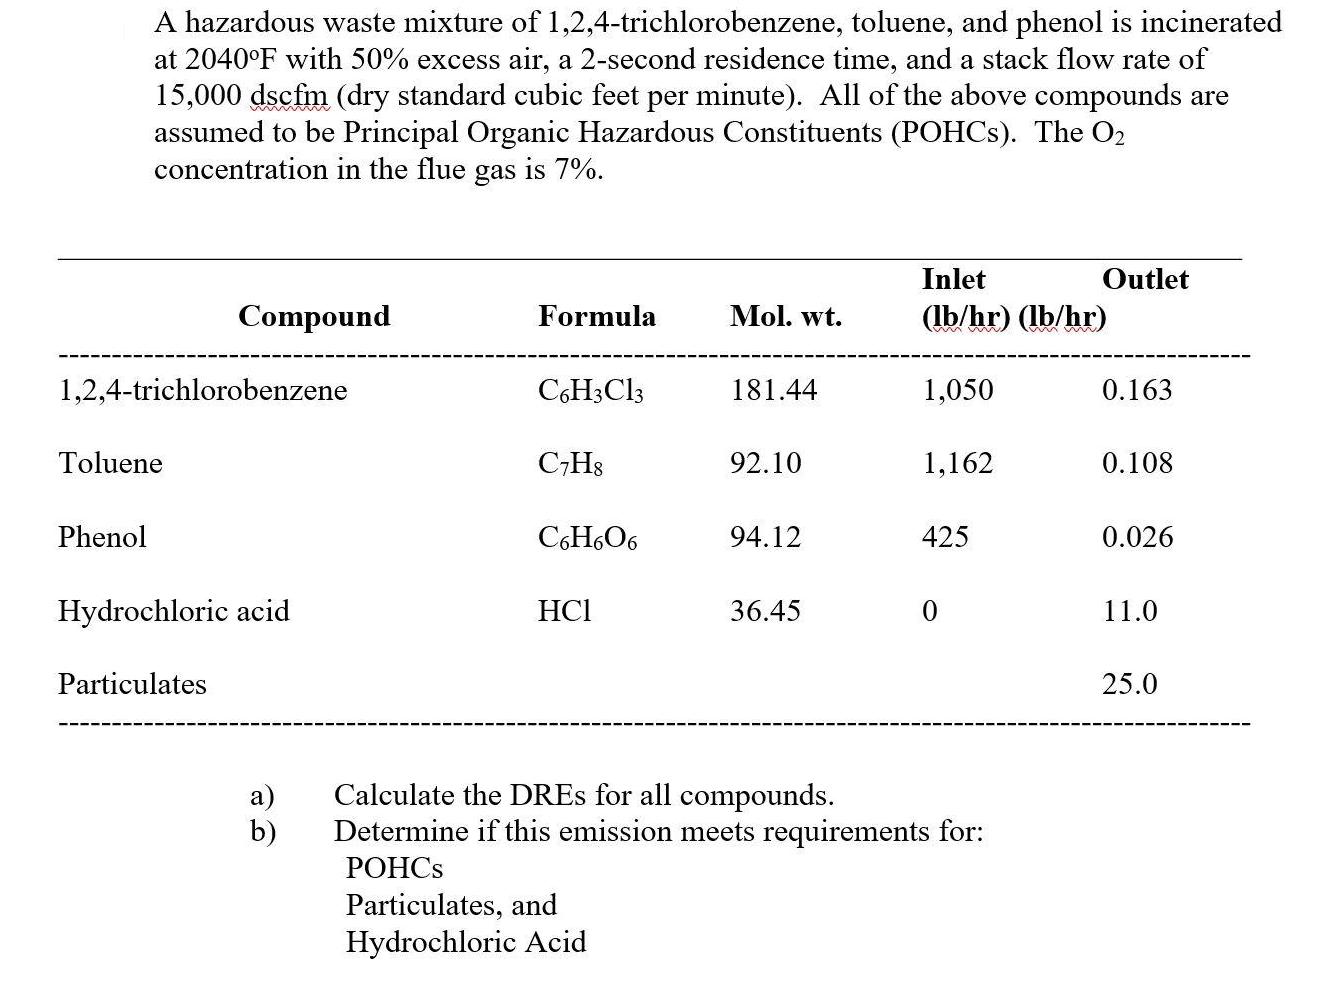 A hazardous waste mixture of 1,2,4-trichlorobenzene, toluene, and phenol is incinerated at 2040F with 50%